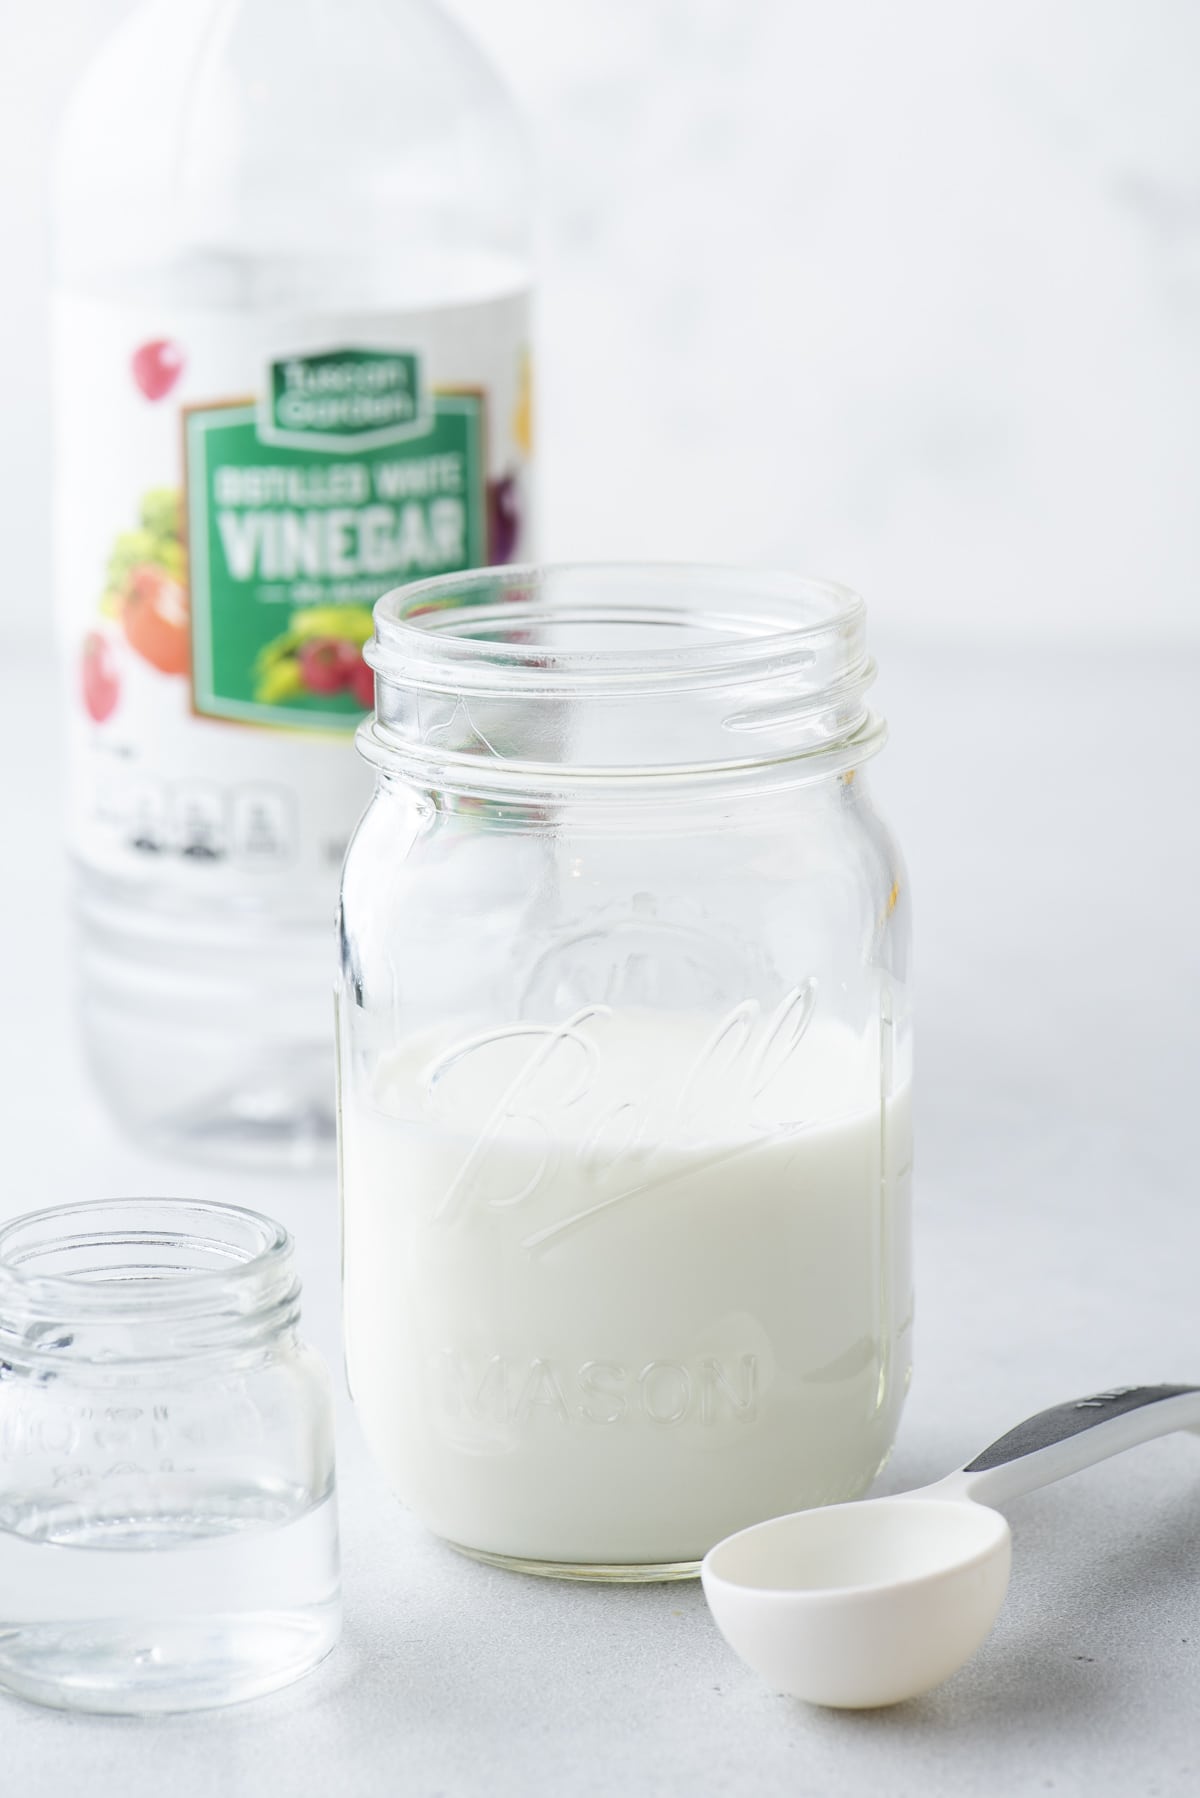 a clear class jar of buttermilk with a white tablespoon and a small clear glass jar of vinegar and a bottle of vinegar in the background